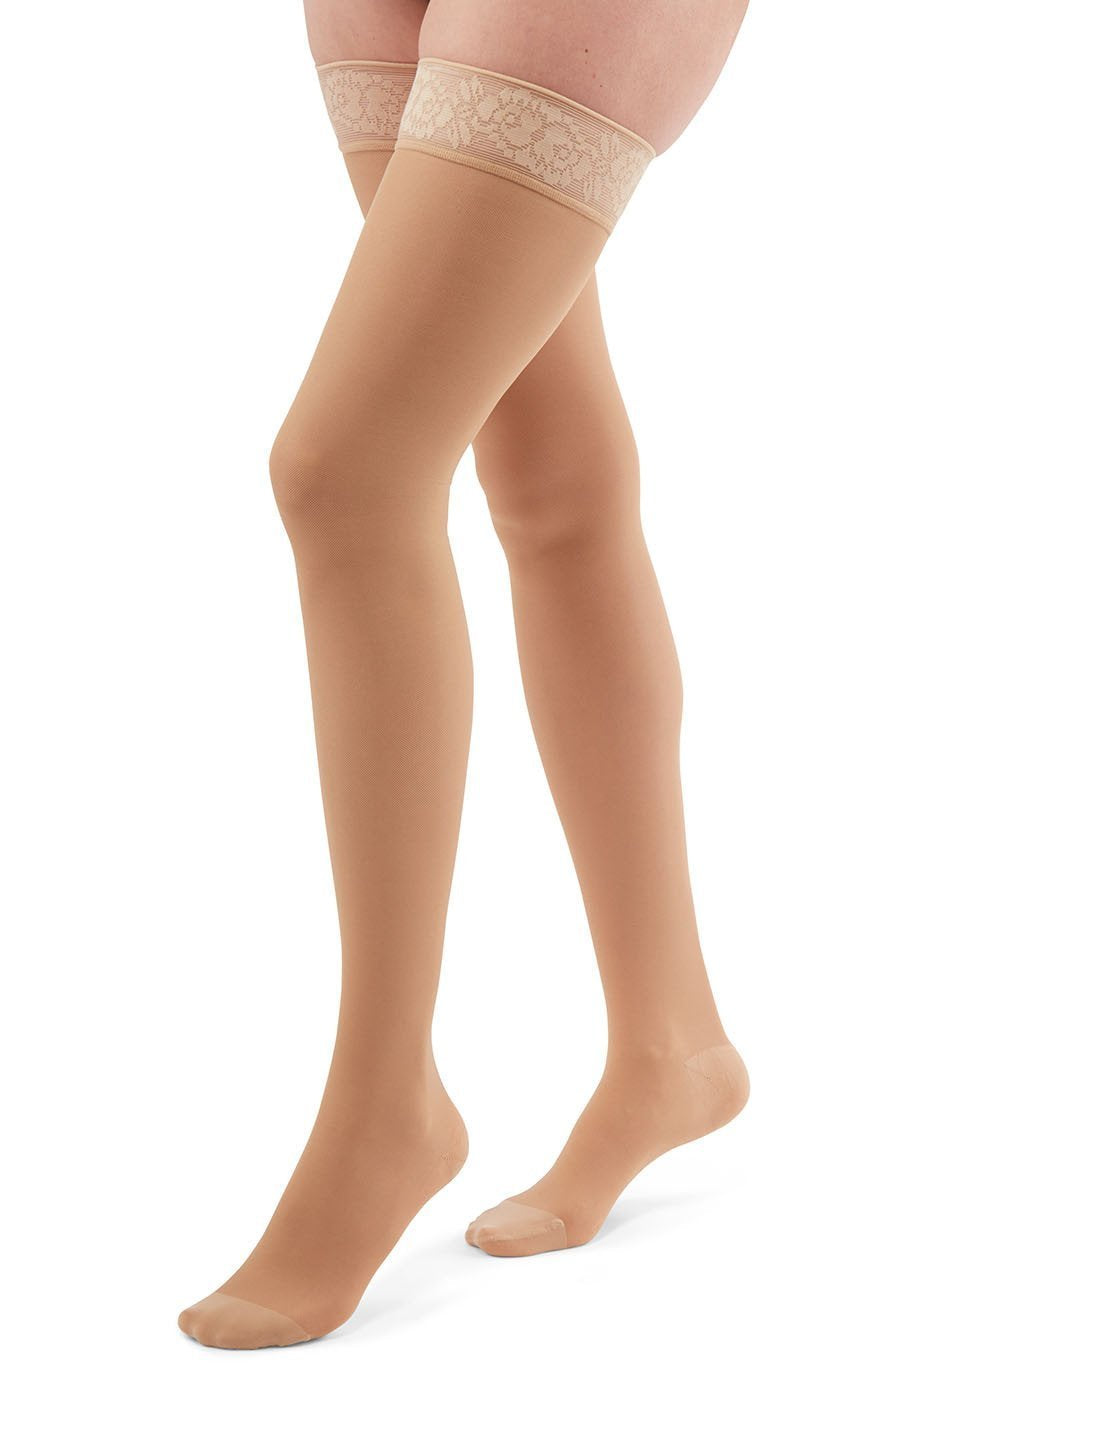 duomed transparent, 15-20 mmHg, Thigh High, Closed Toe